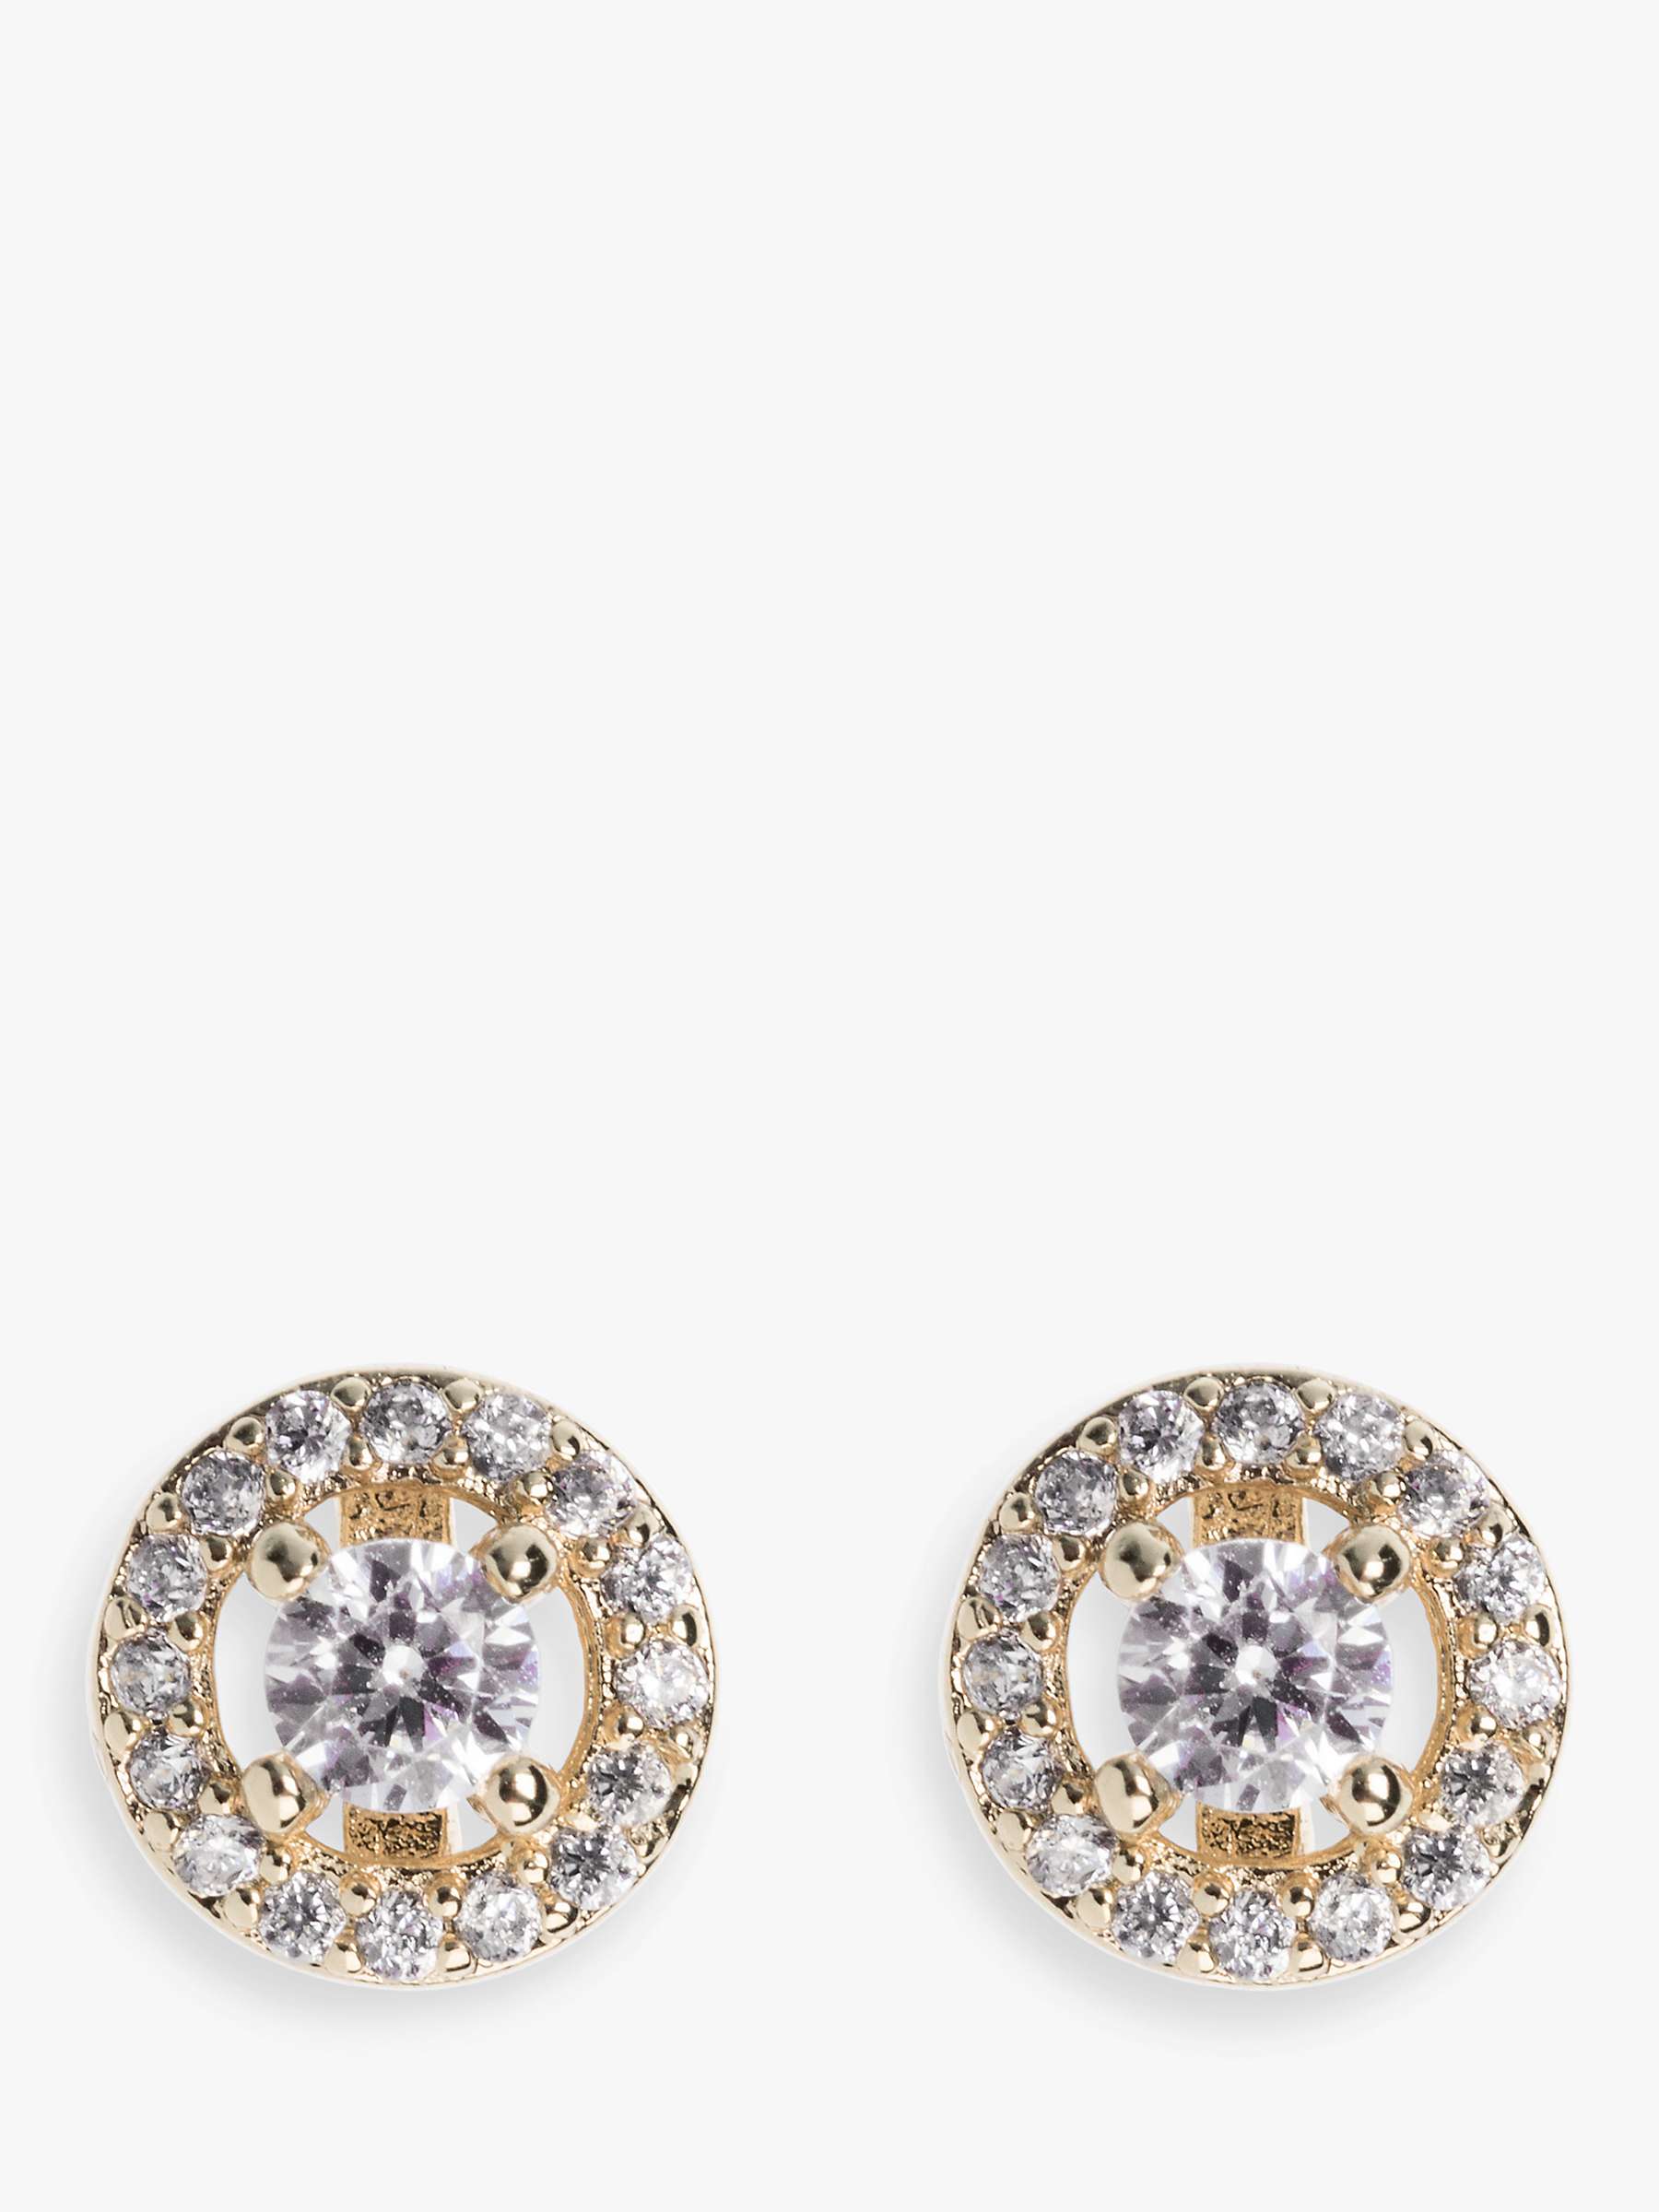 Buy Ivory & Co. Balmoral Round Stud Earrings Online at johnlewis.com